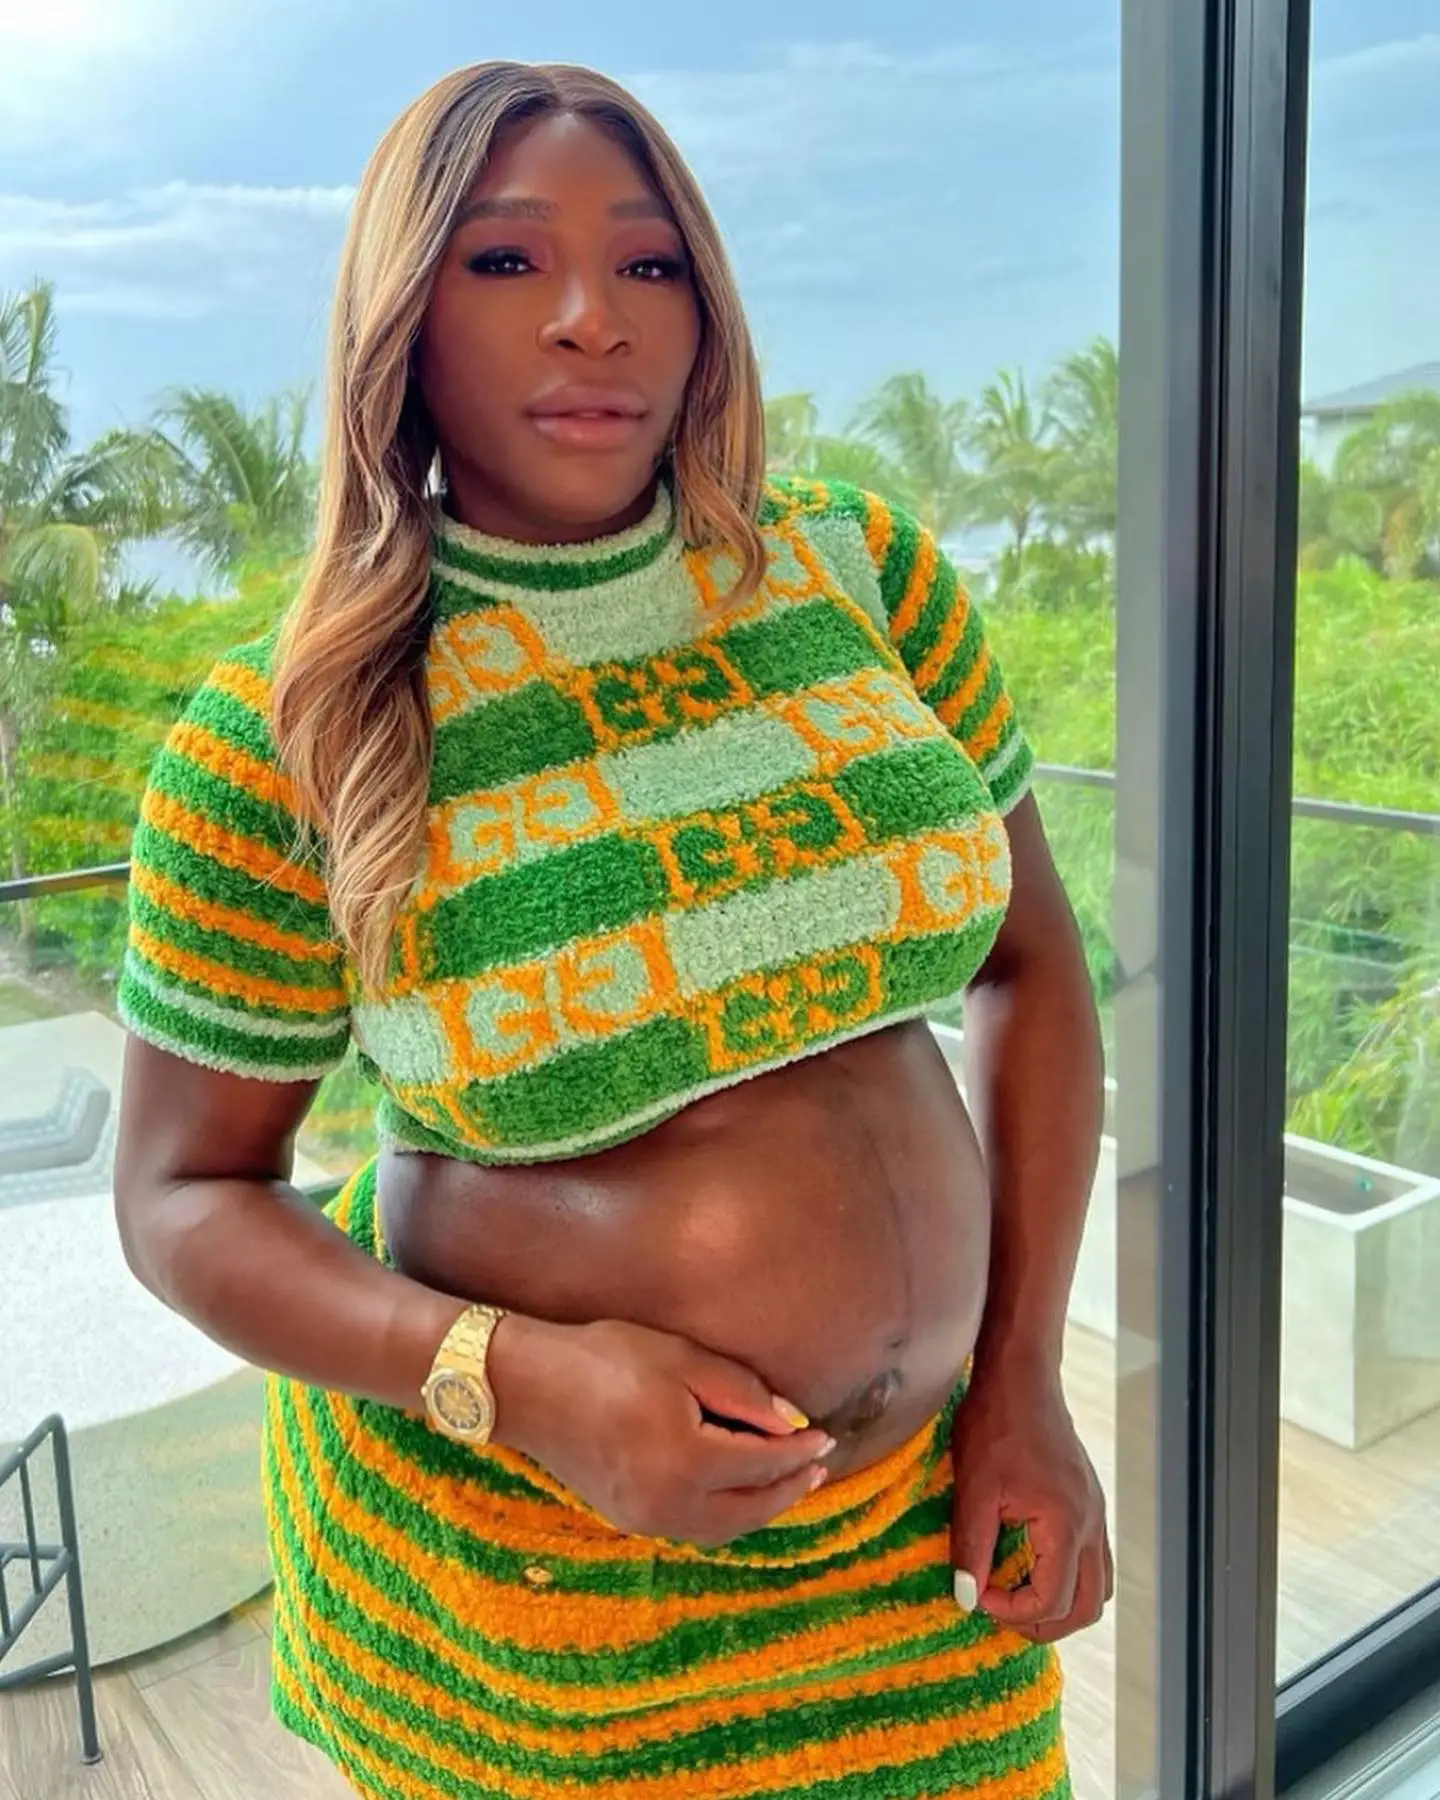 #SerenaWilliams showed off her baby bump wearing a #Gucci look. Hot! Ig/Reprodu